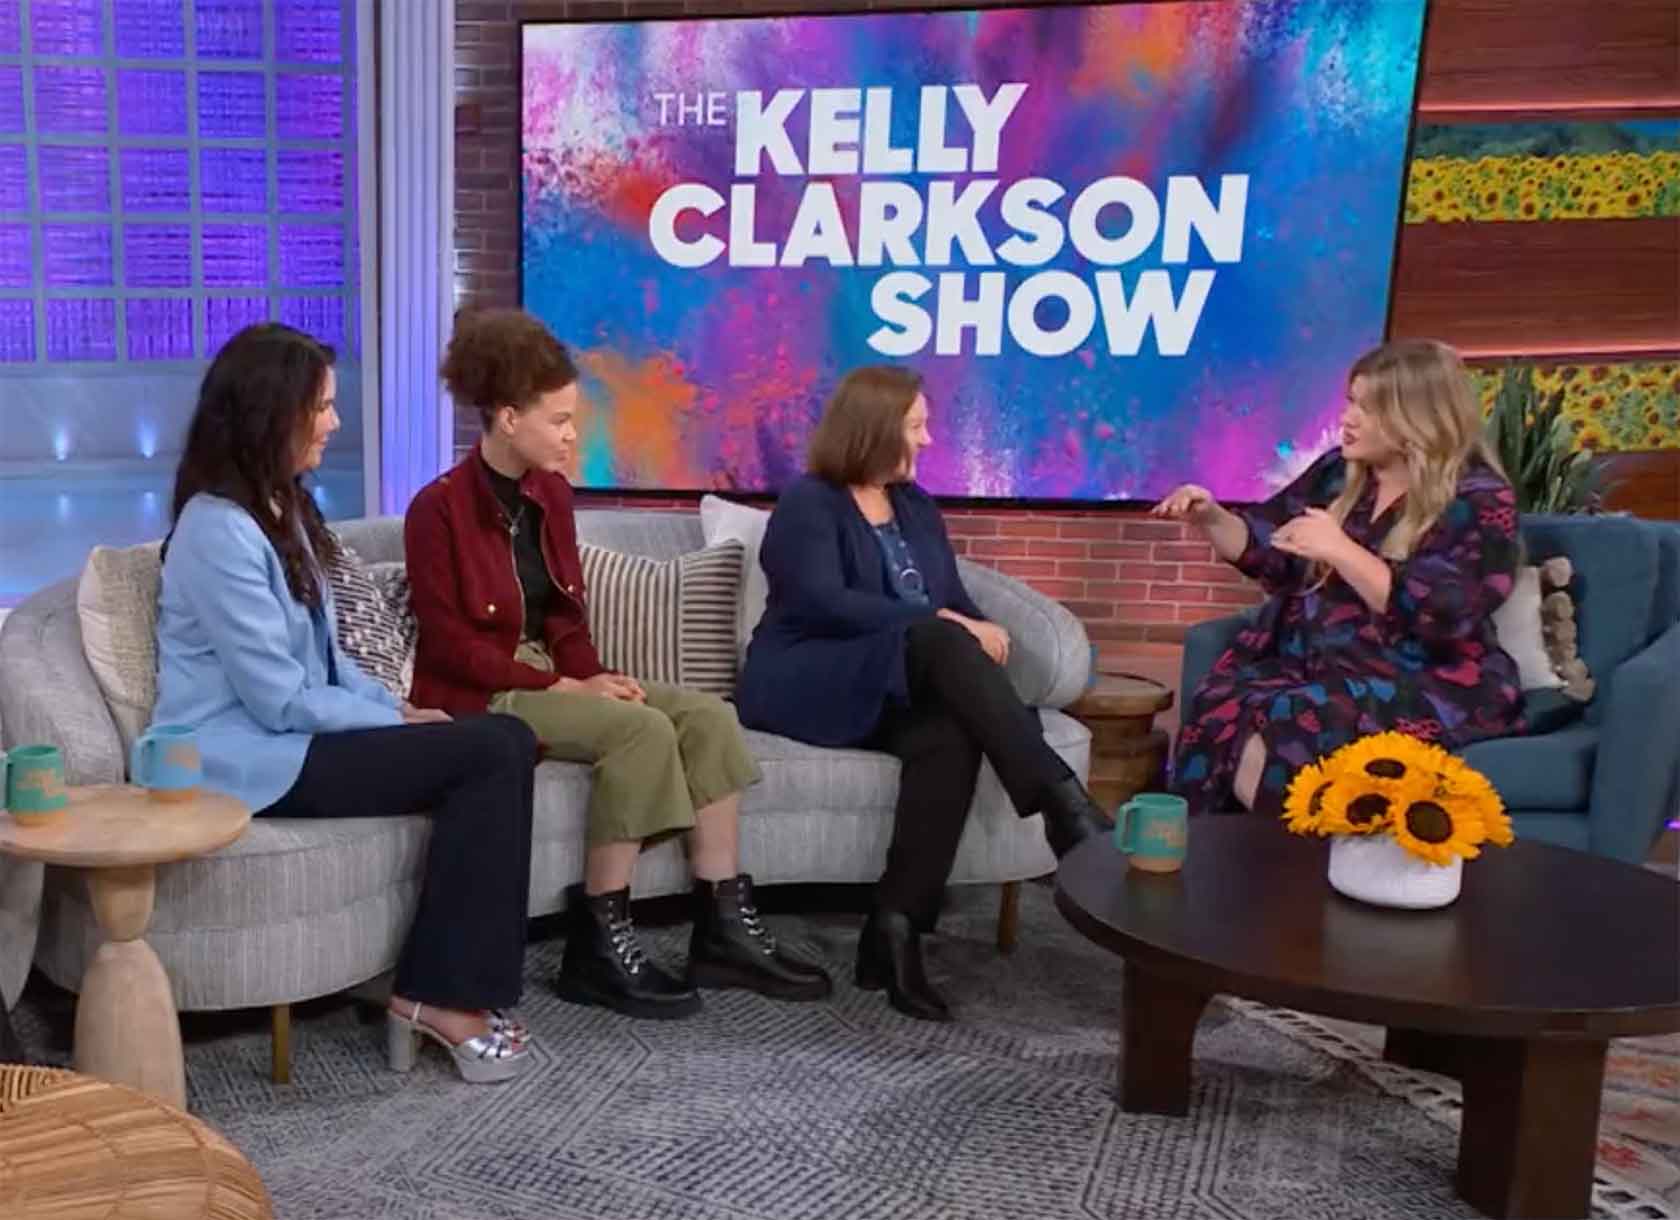 Grace Lyde '23 on the Kelly Clarkson Show